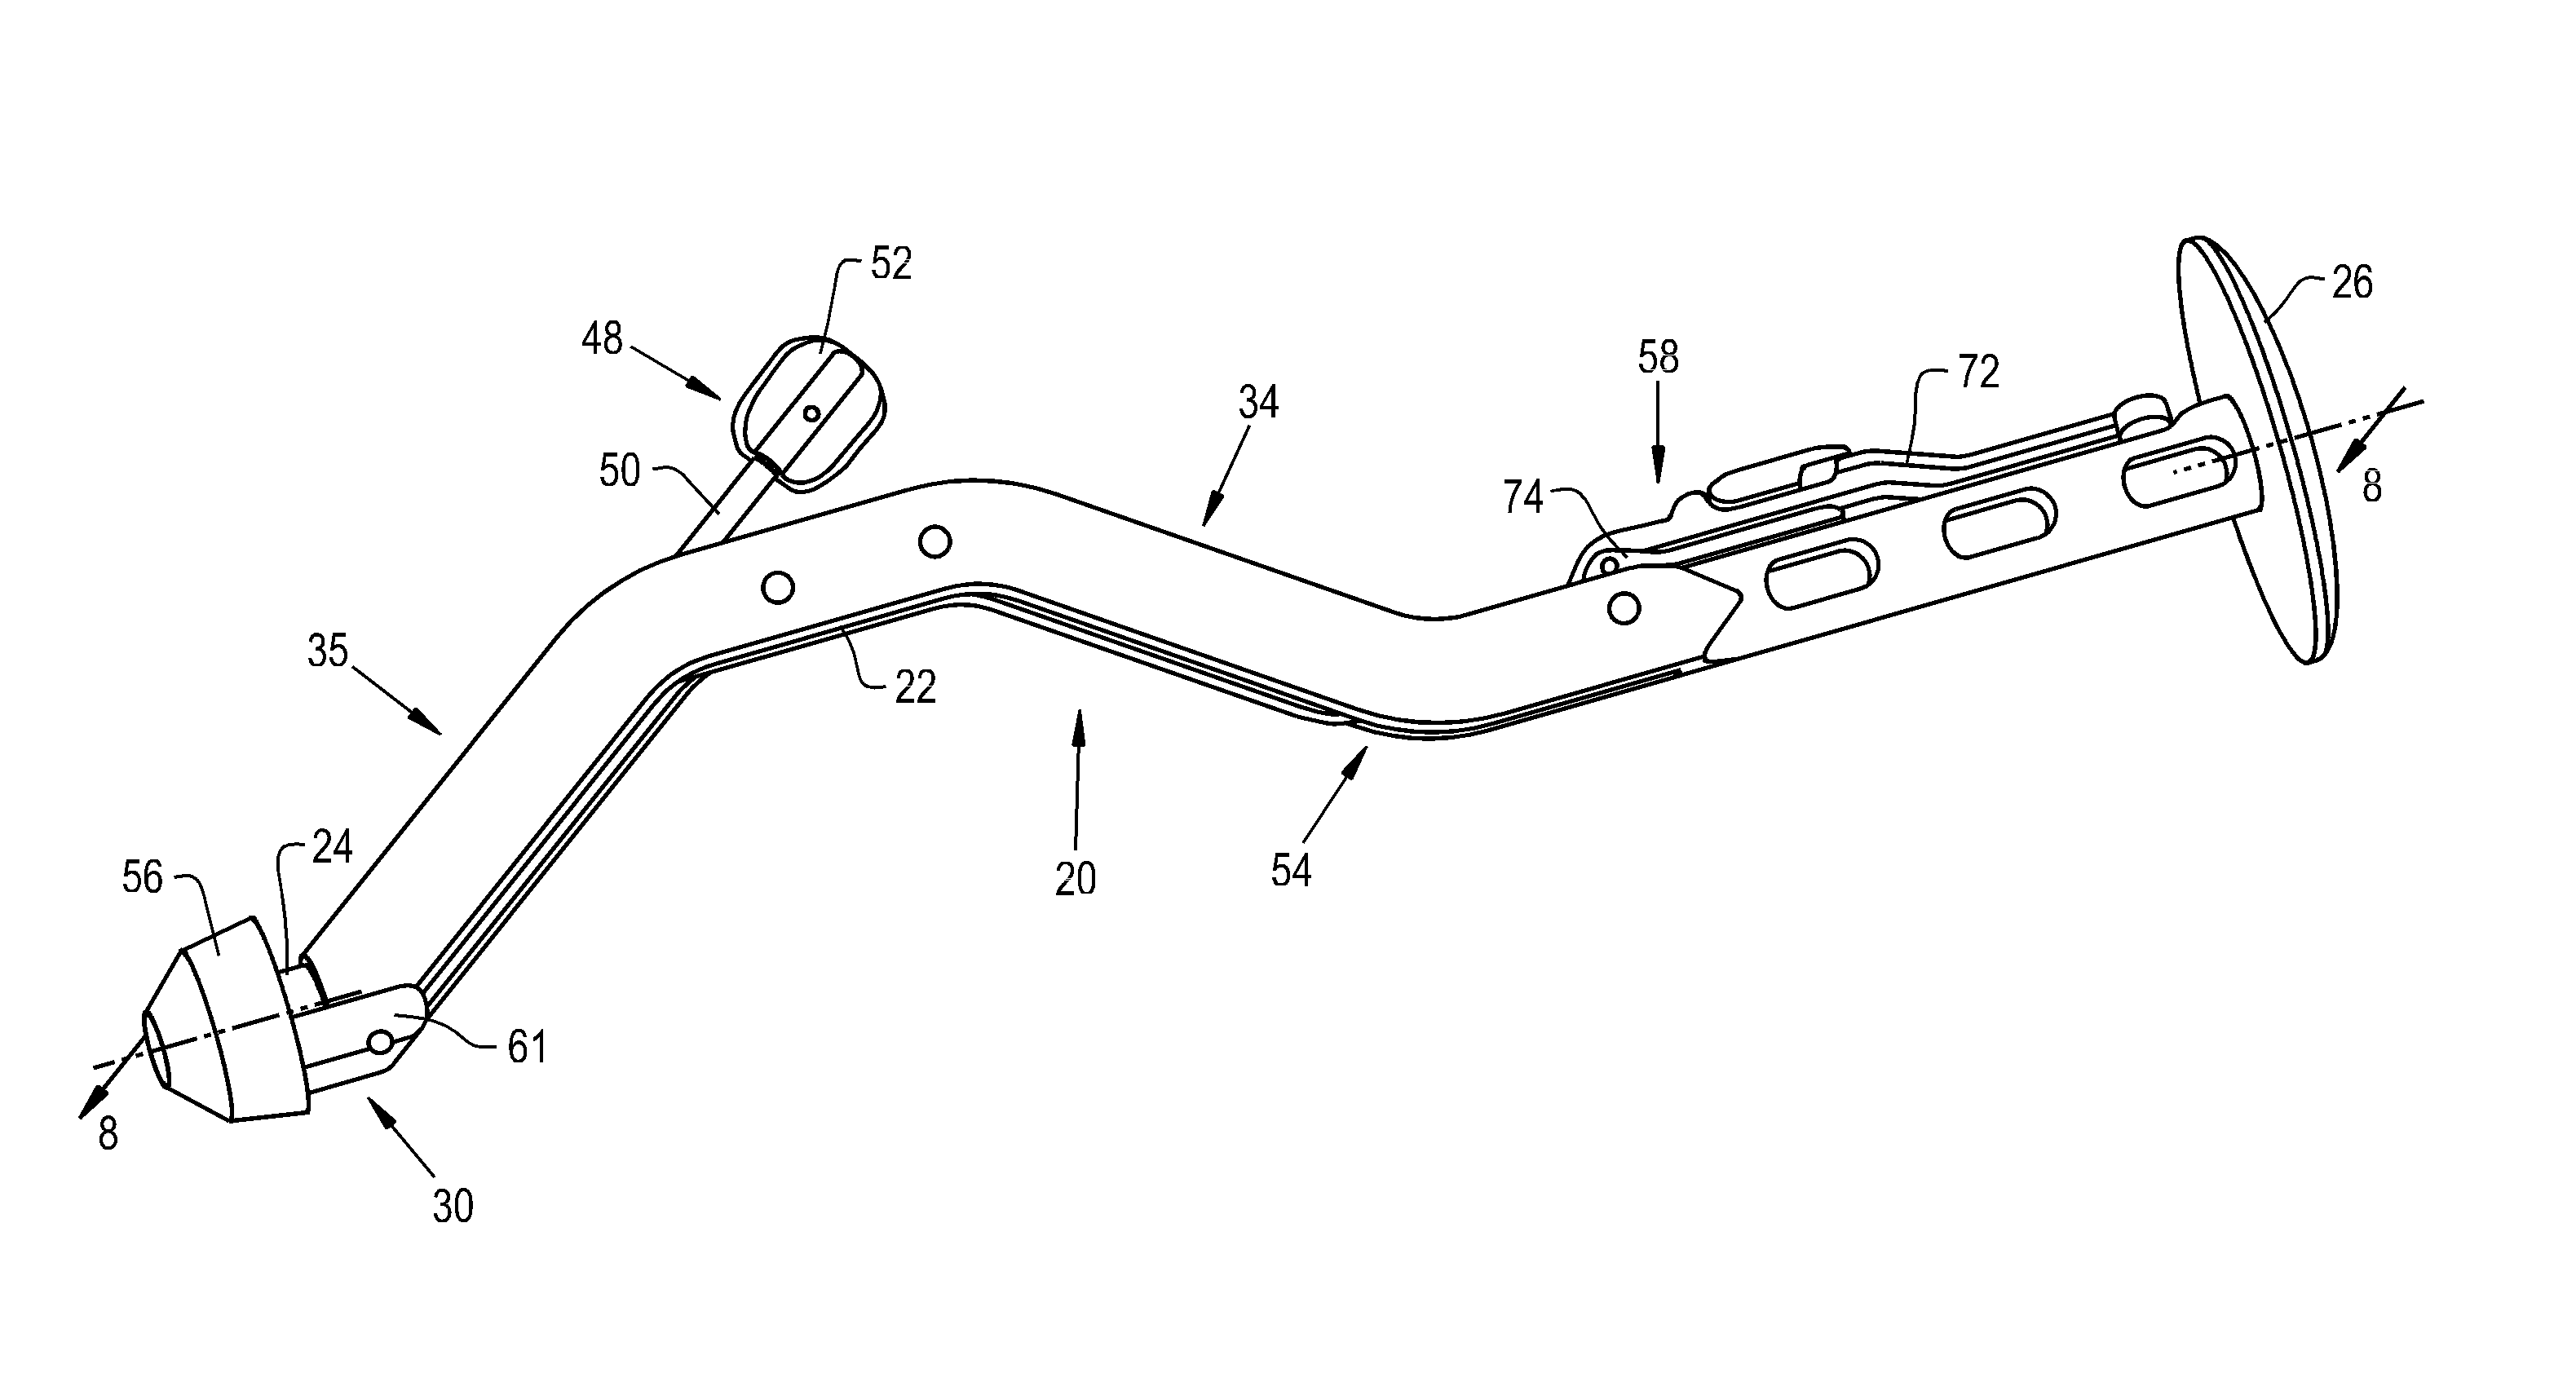 Method of attachment of implantable cup to a cup impactor